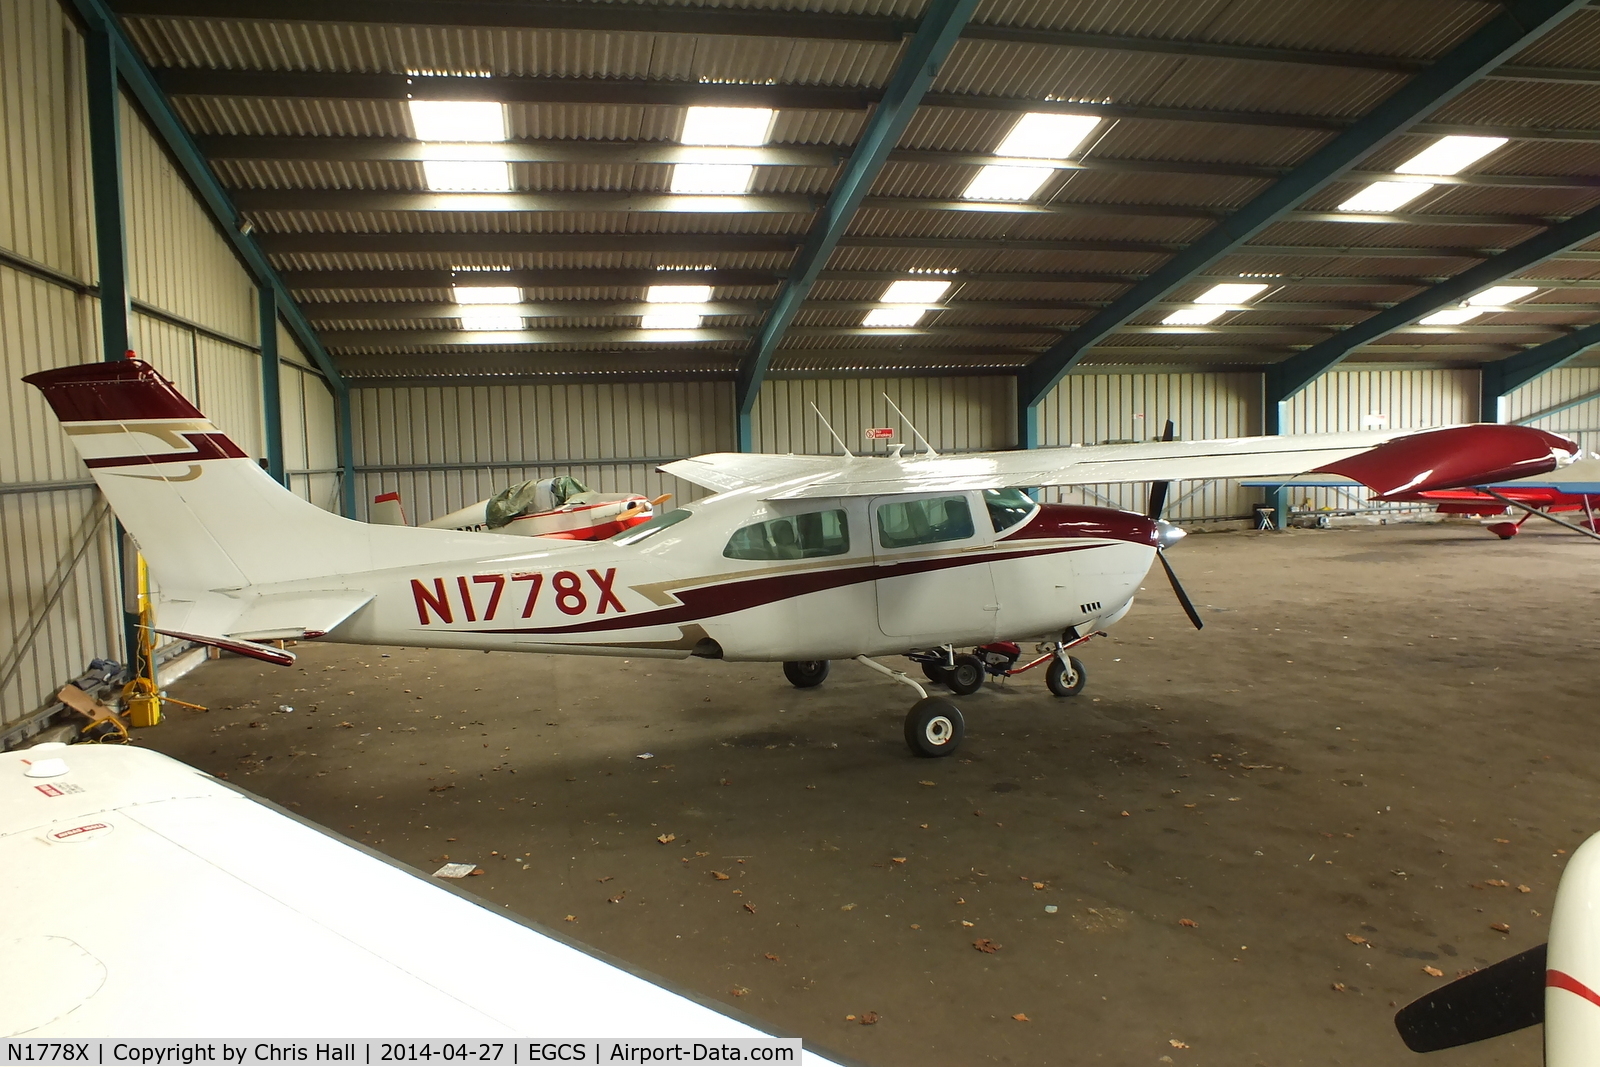 N1778X, 1975 Cessna 210L Centurion C/N 21060798, privately owned